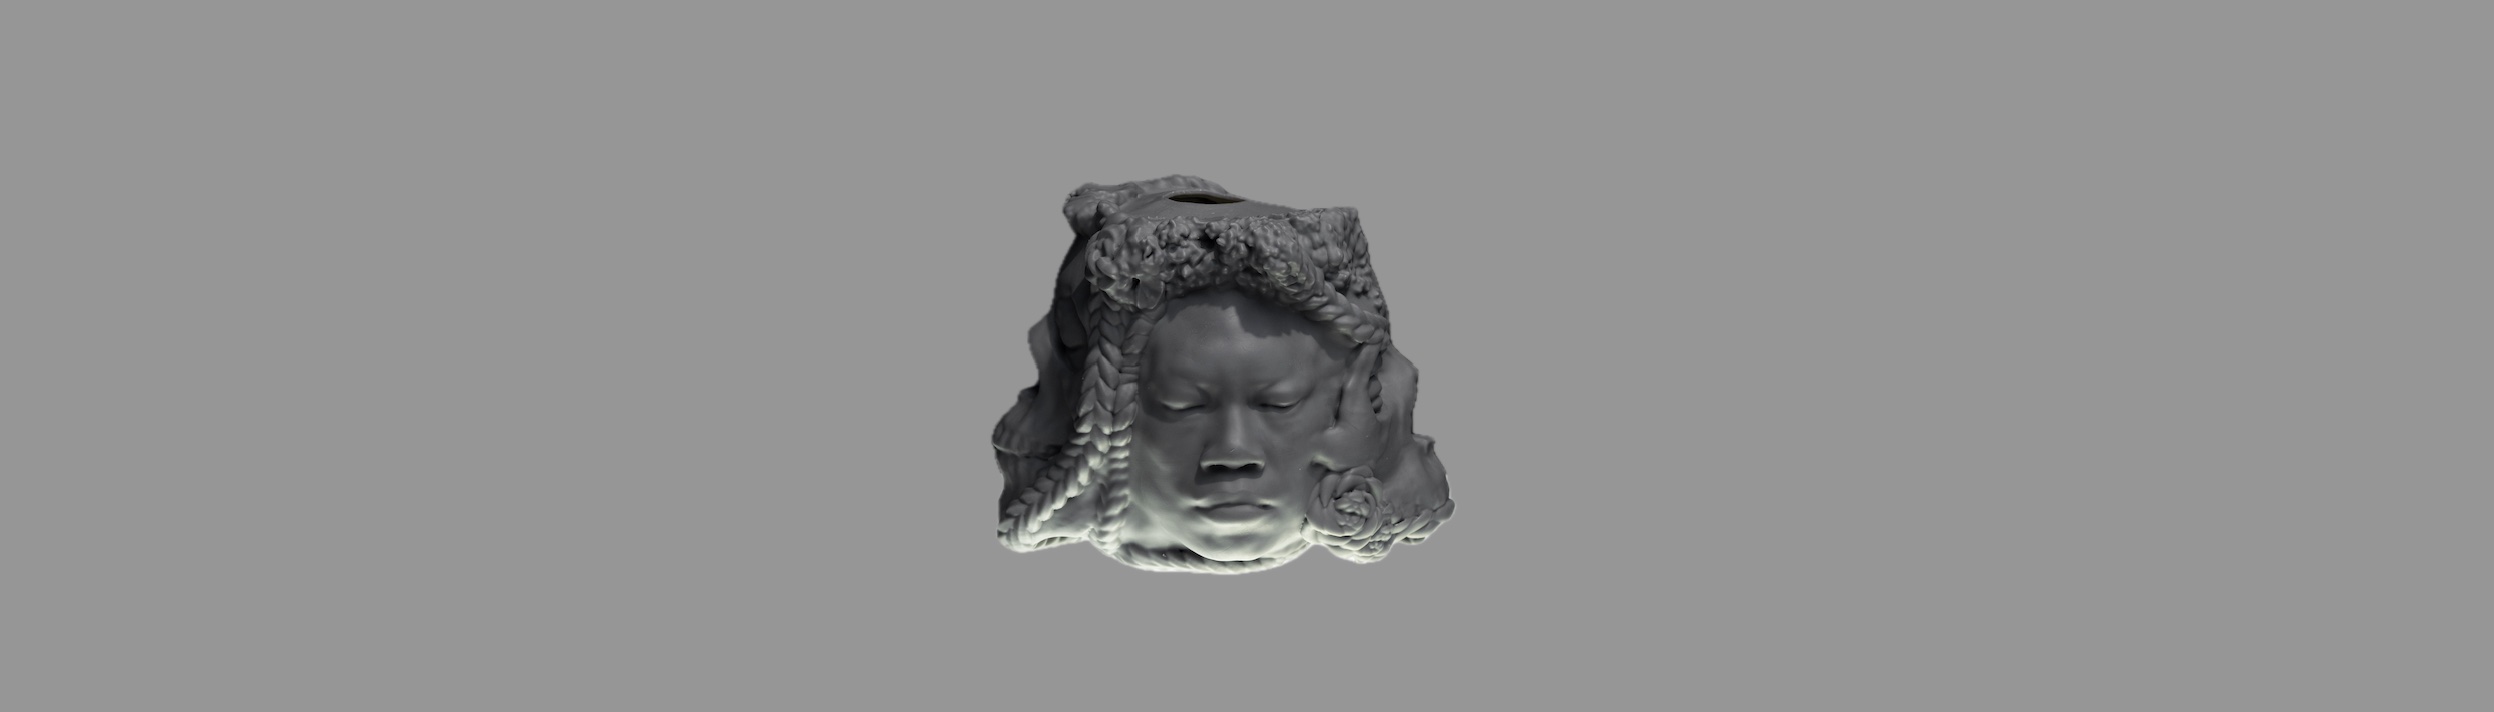 A 3D printed sculpture titled Gray Matter which takes the form of a bust of an African American woman's head with her eyes closed, with a skull protruding from the side of the head.